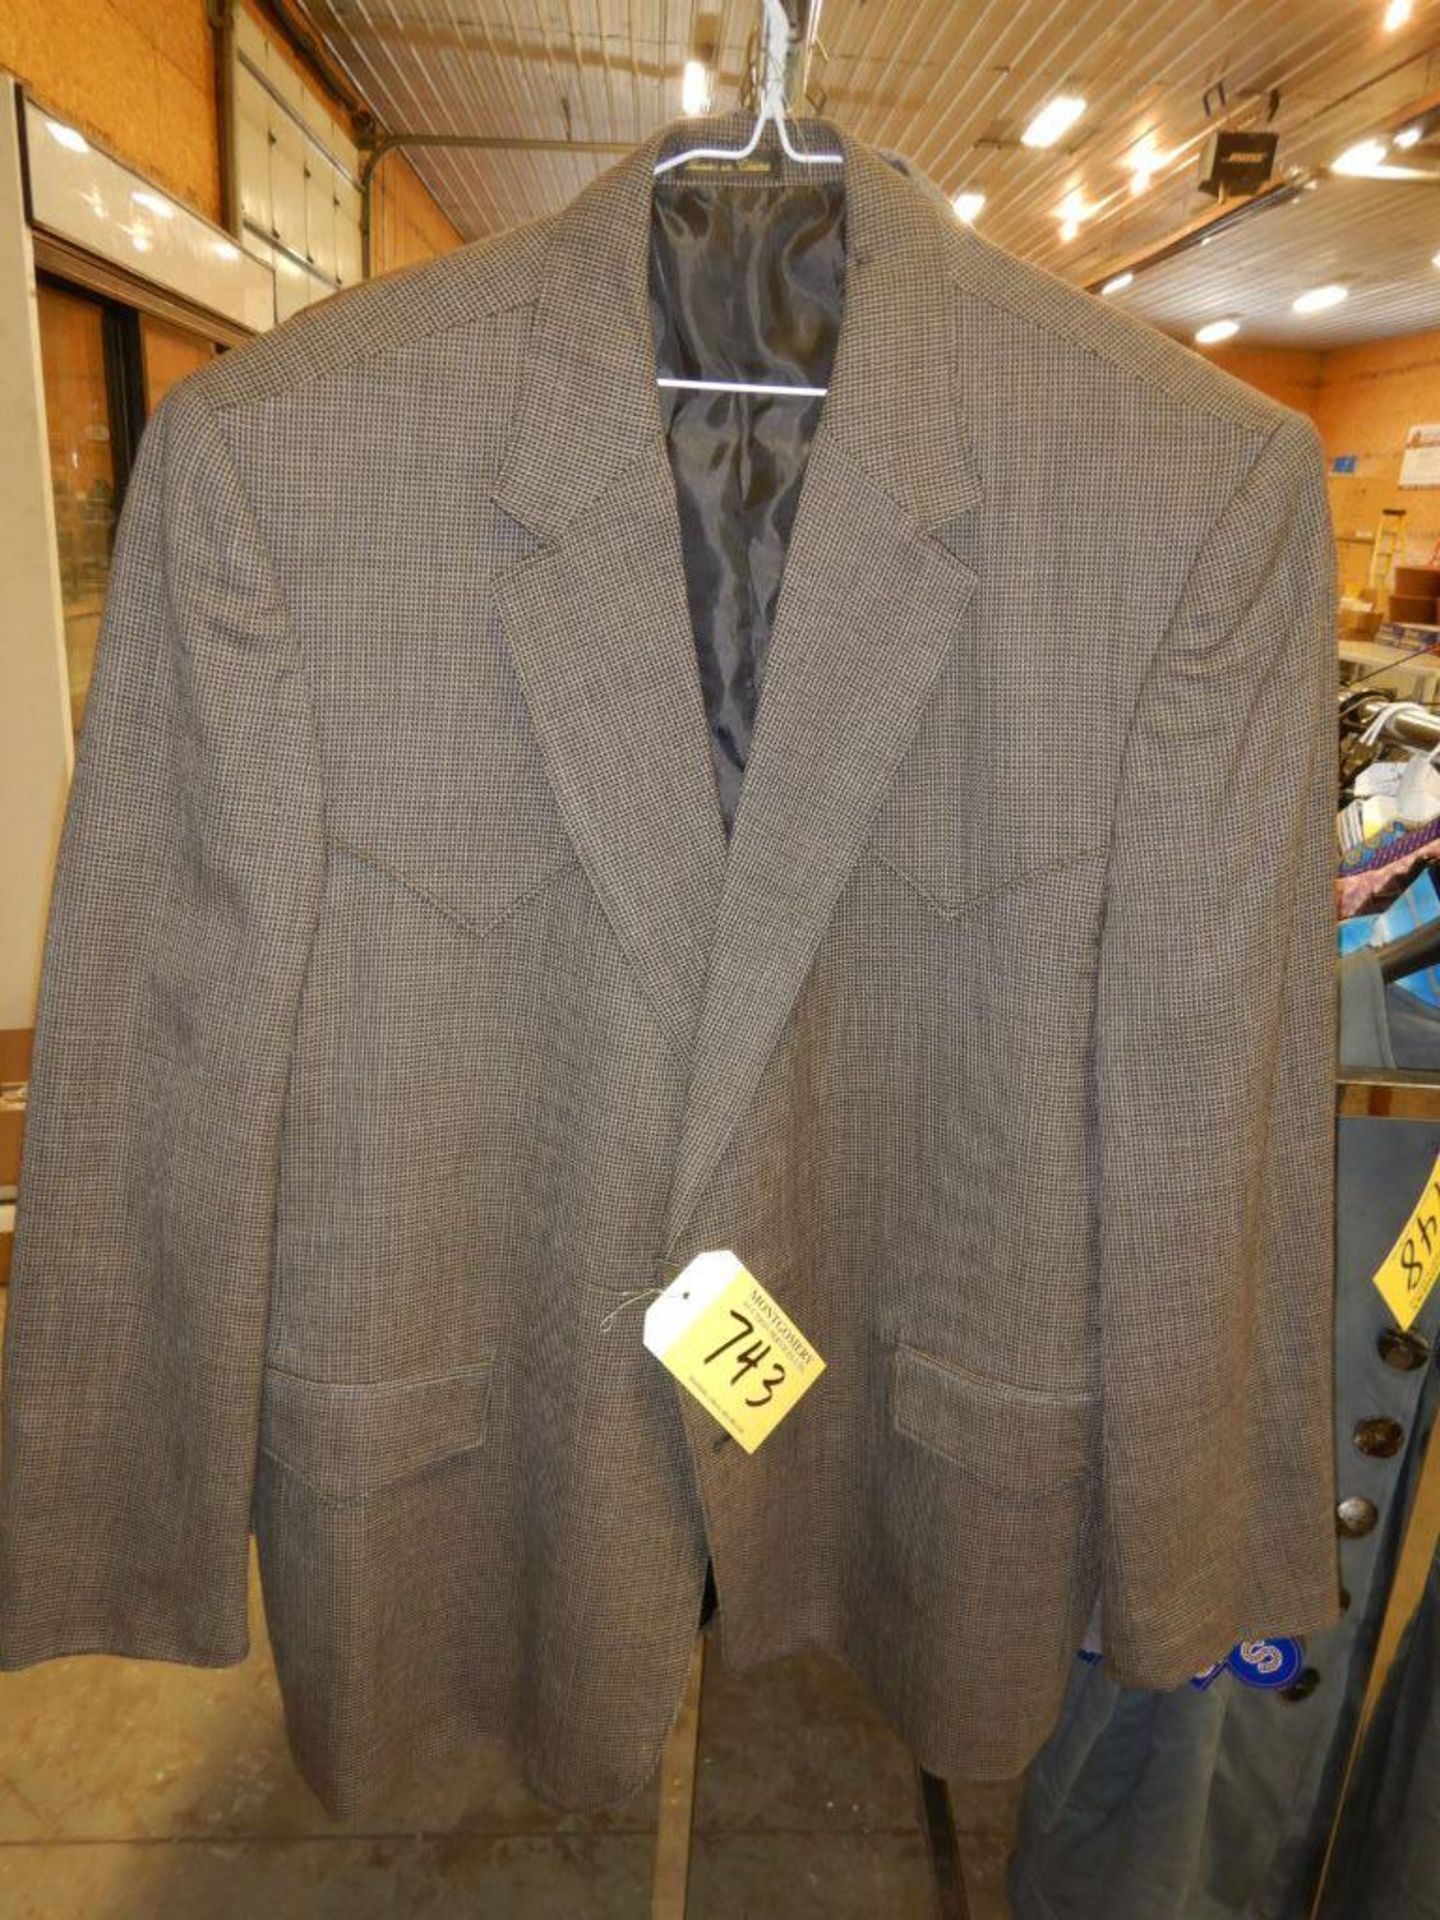 3-CIRCLE S WOOL WESTERN SUIT JACKETS, SIZE 50R - Image 3 of 3